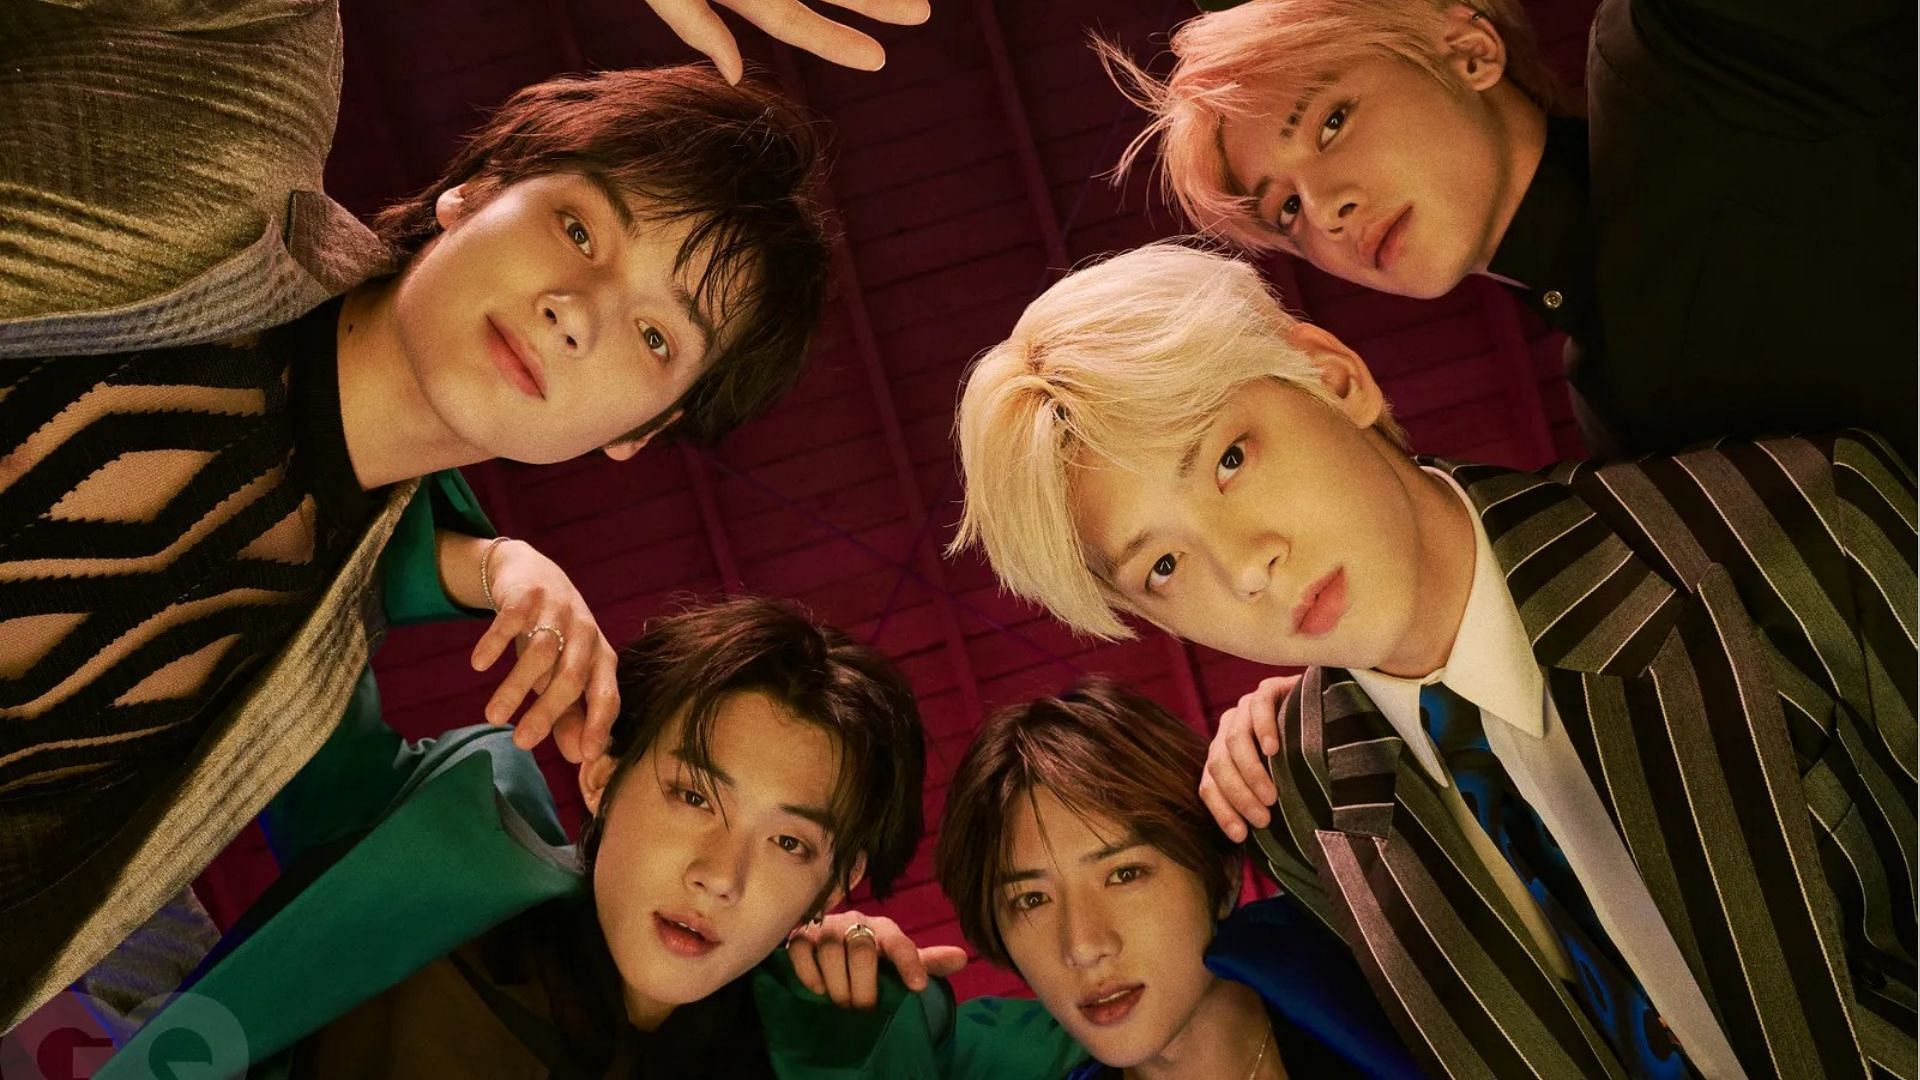 GQ Magazine lands in trouble over multiple issues in their interview with TXT (Image via Twitter/GQMagazine)